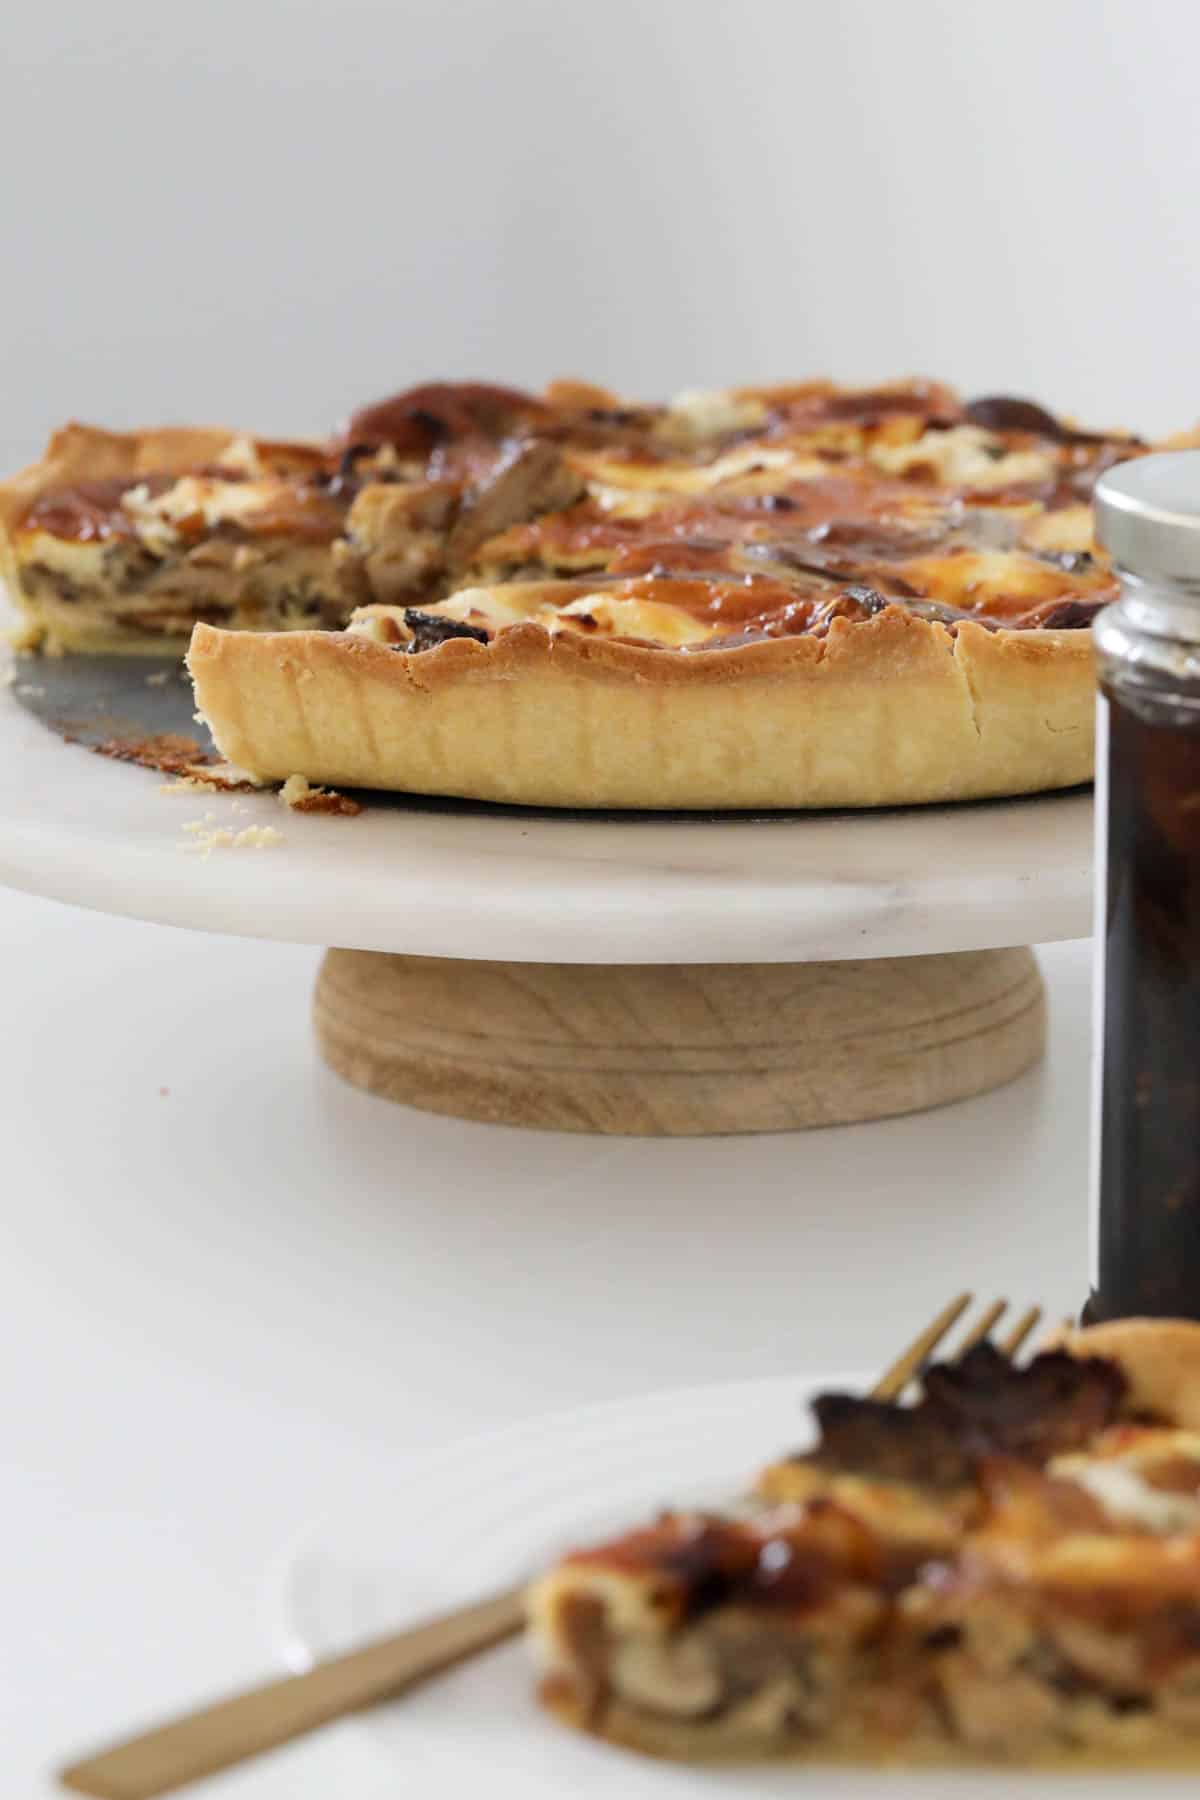 A mushroom tart with one serve removed, placed on a cake stand.